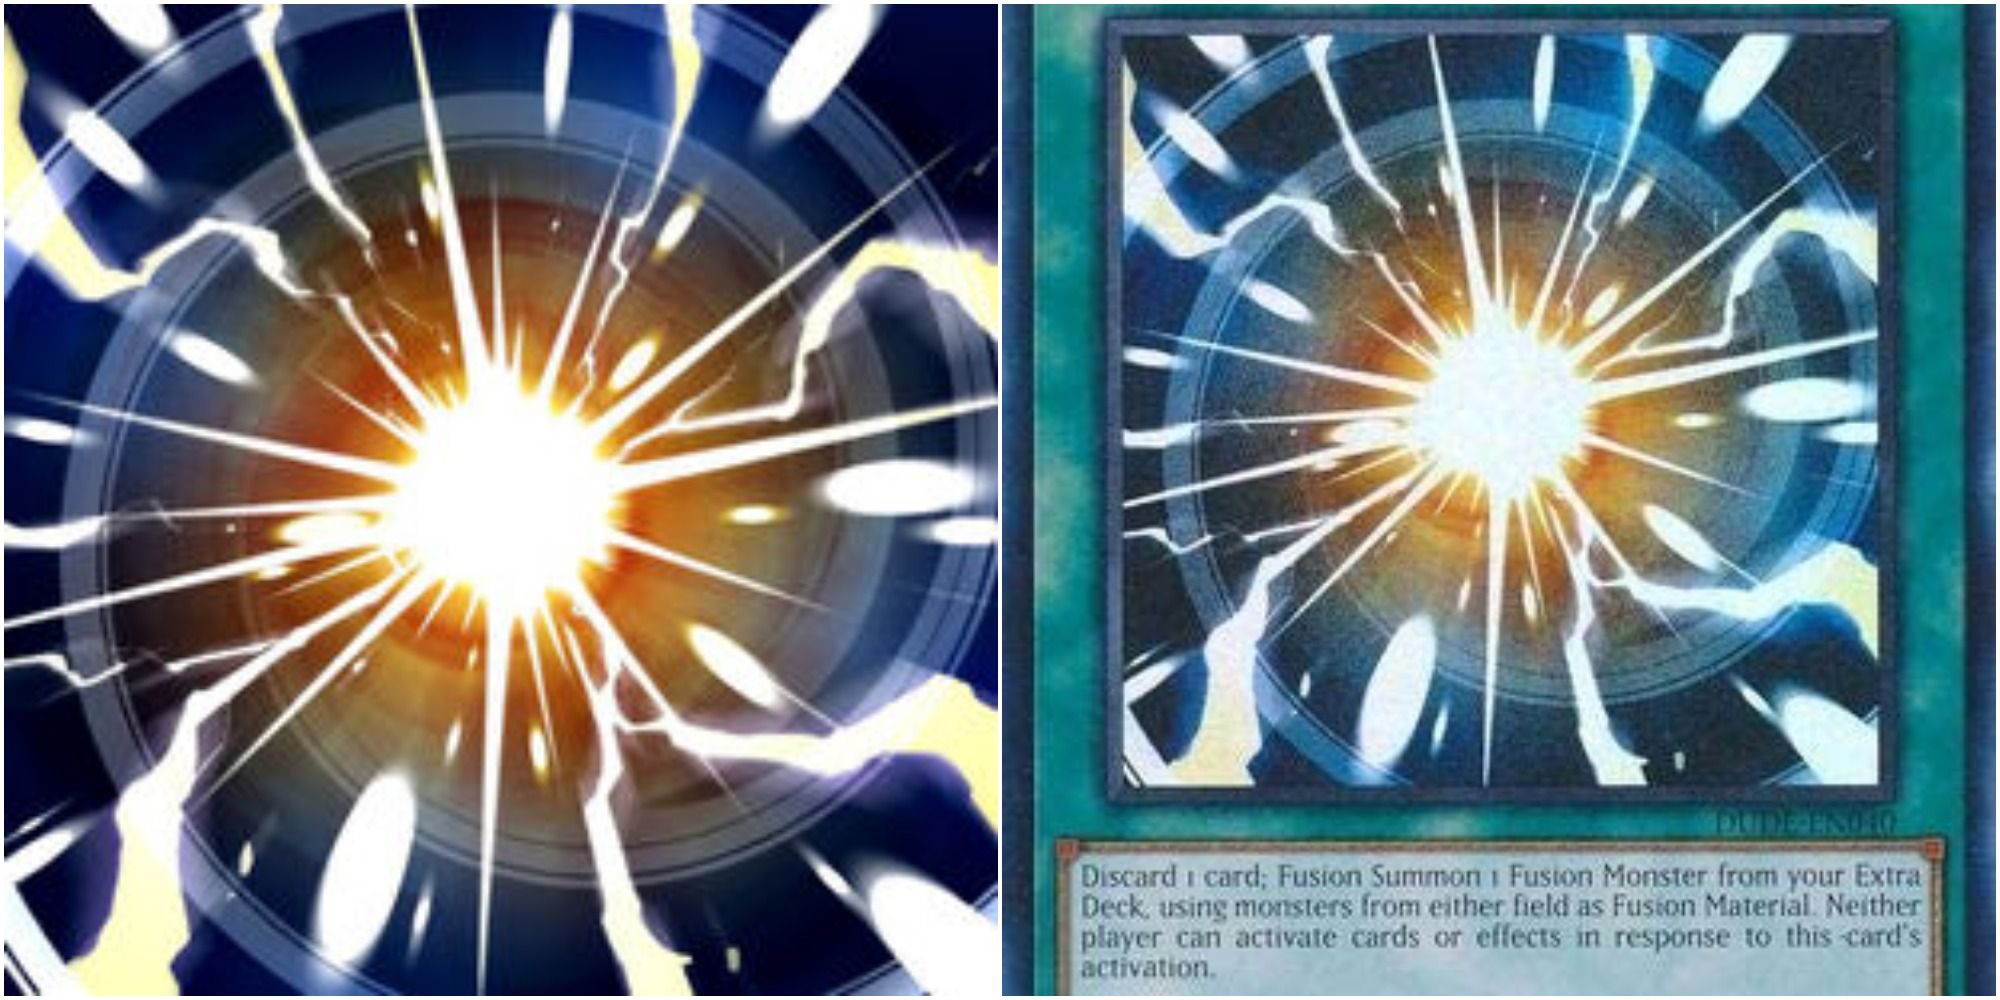 yugioh super polymerization art and card text